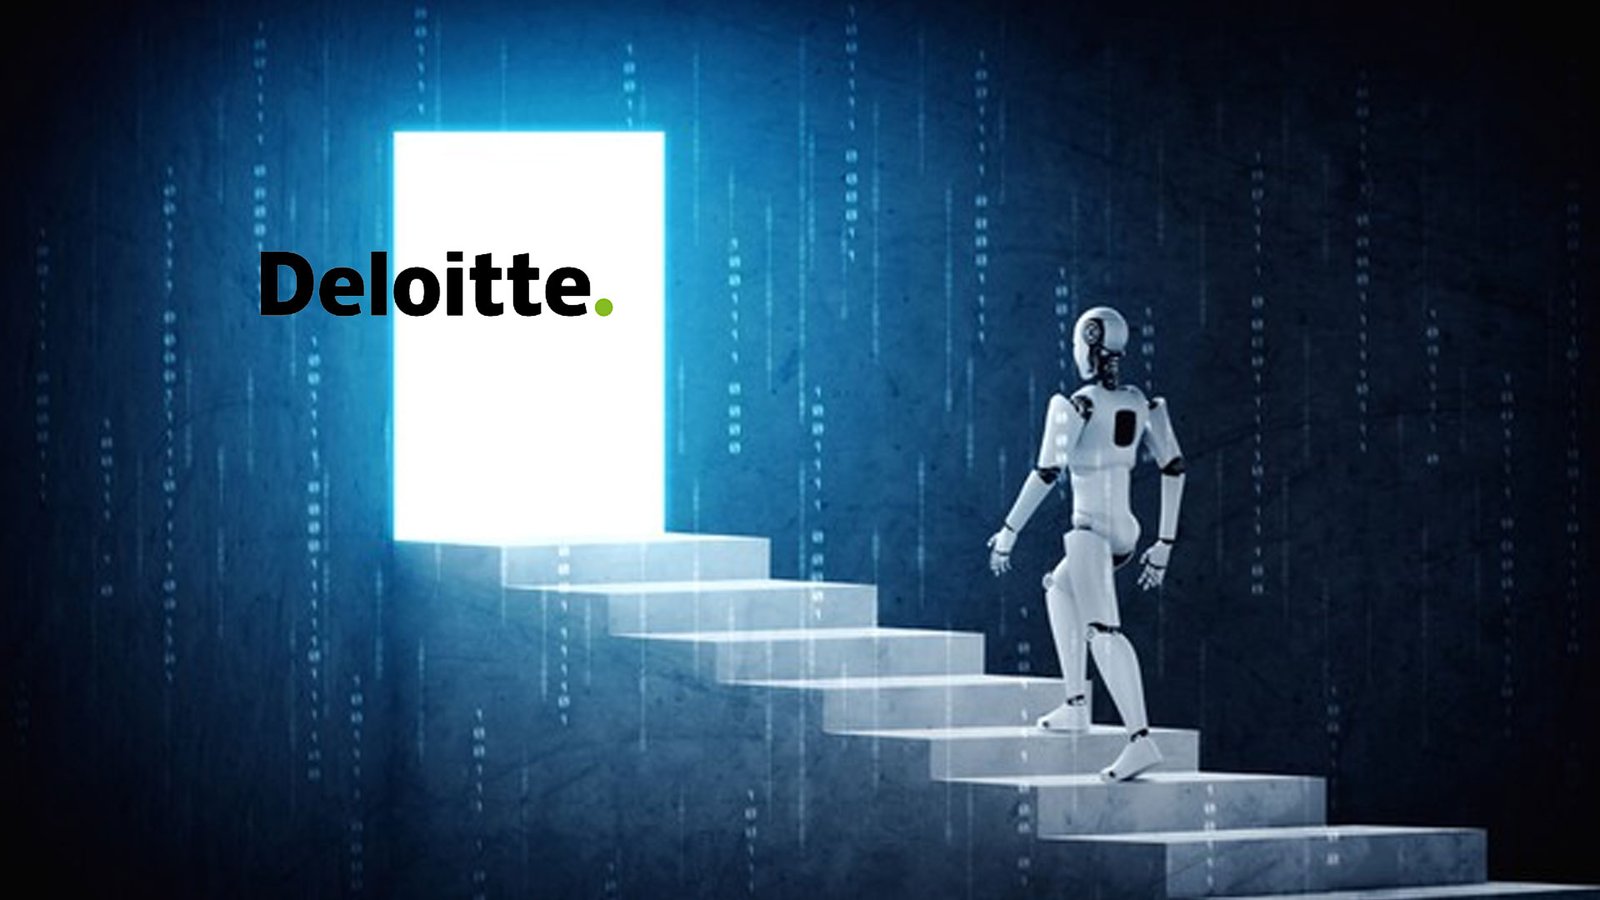 Deloitte AI Institute & Chatterbox Labs to Ensure Ethical AI